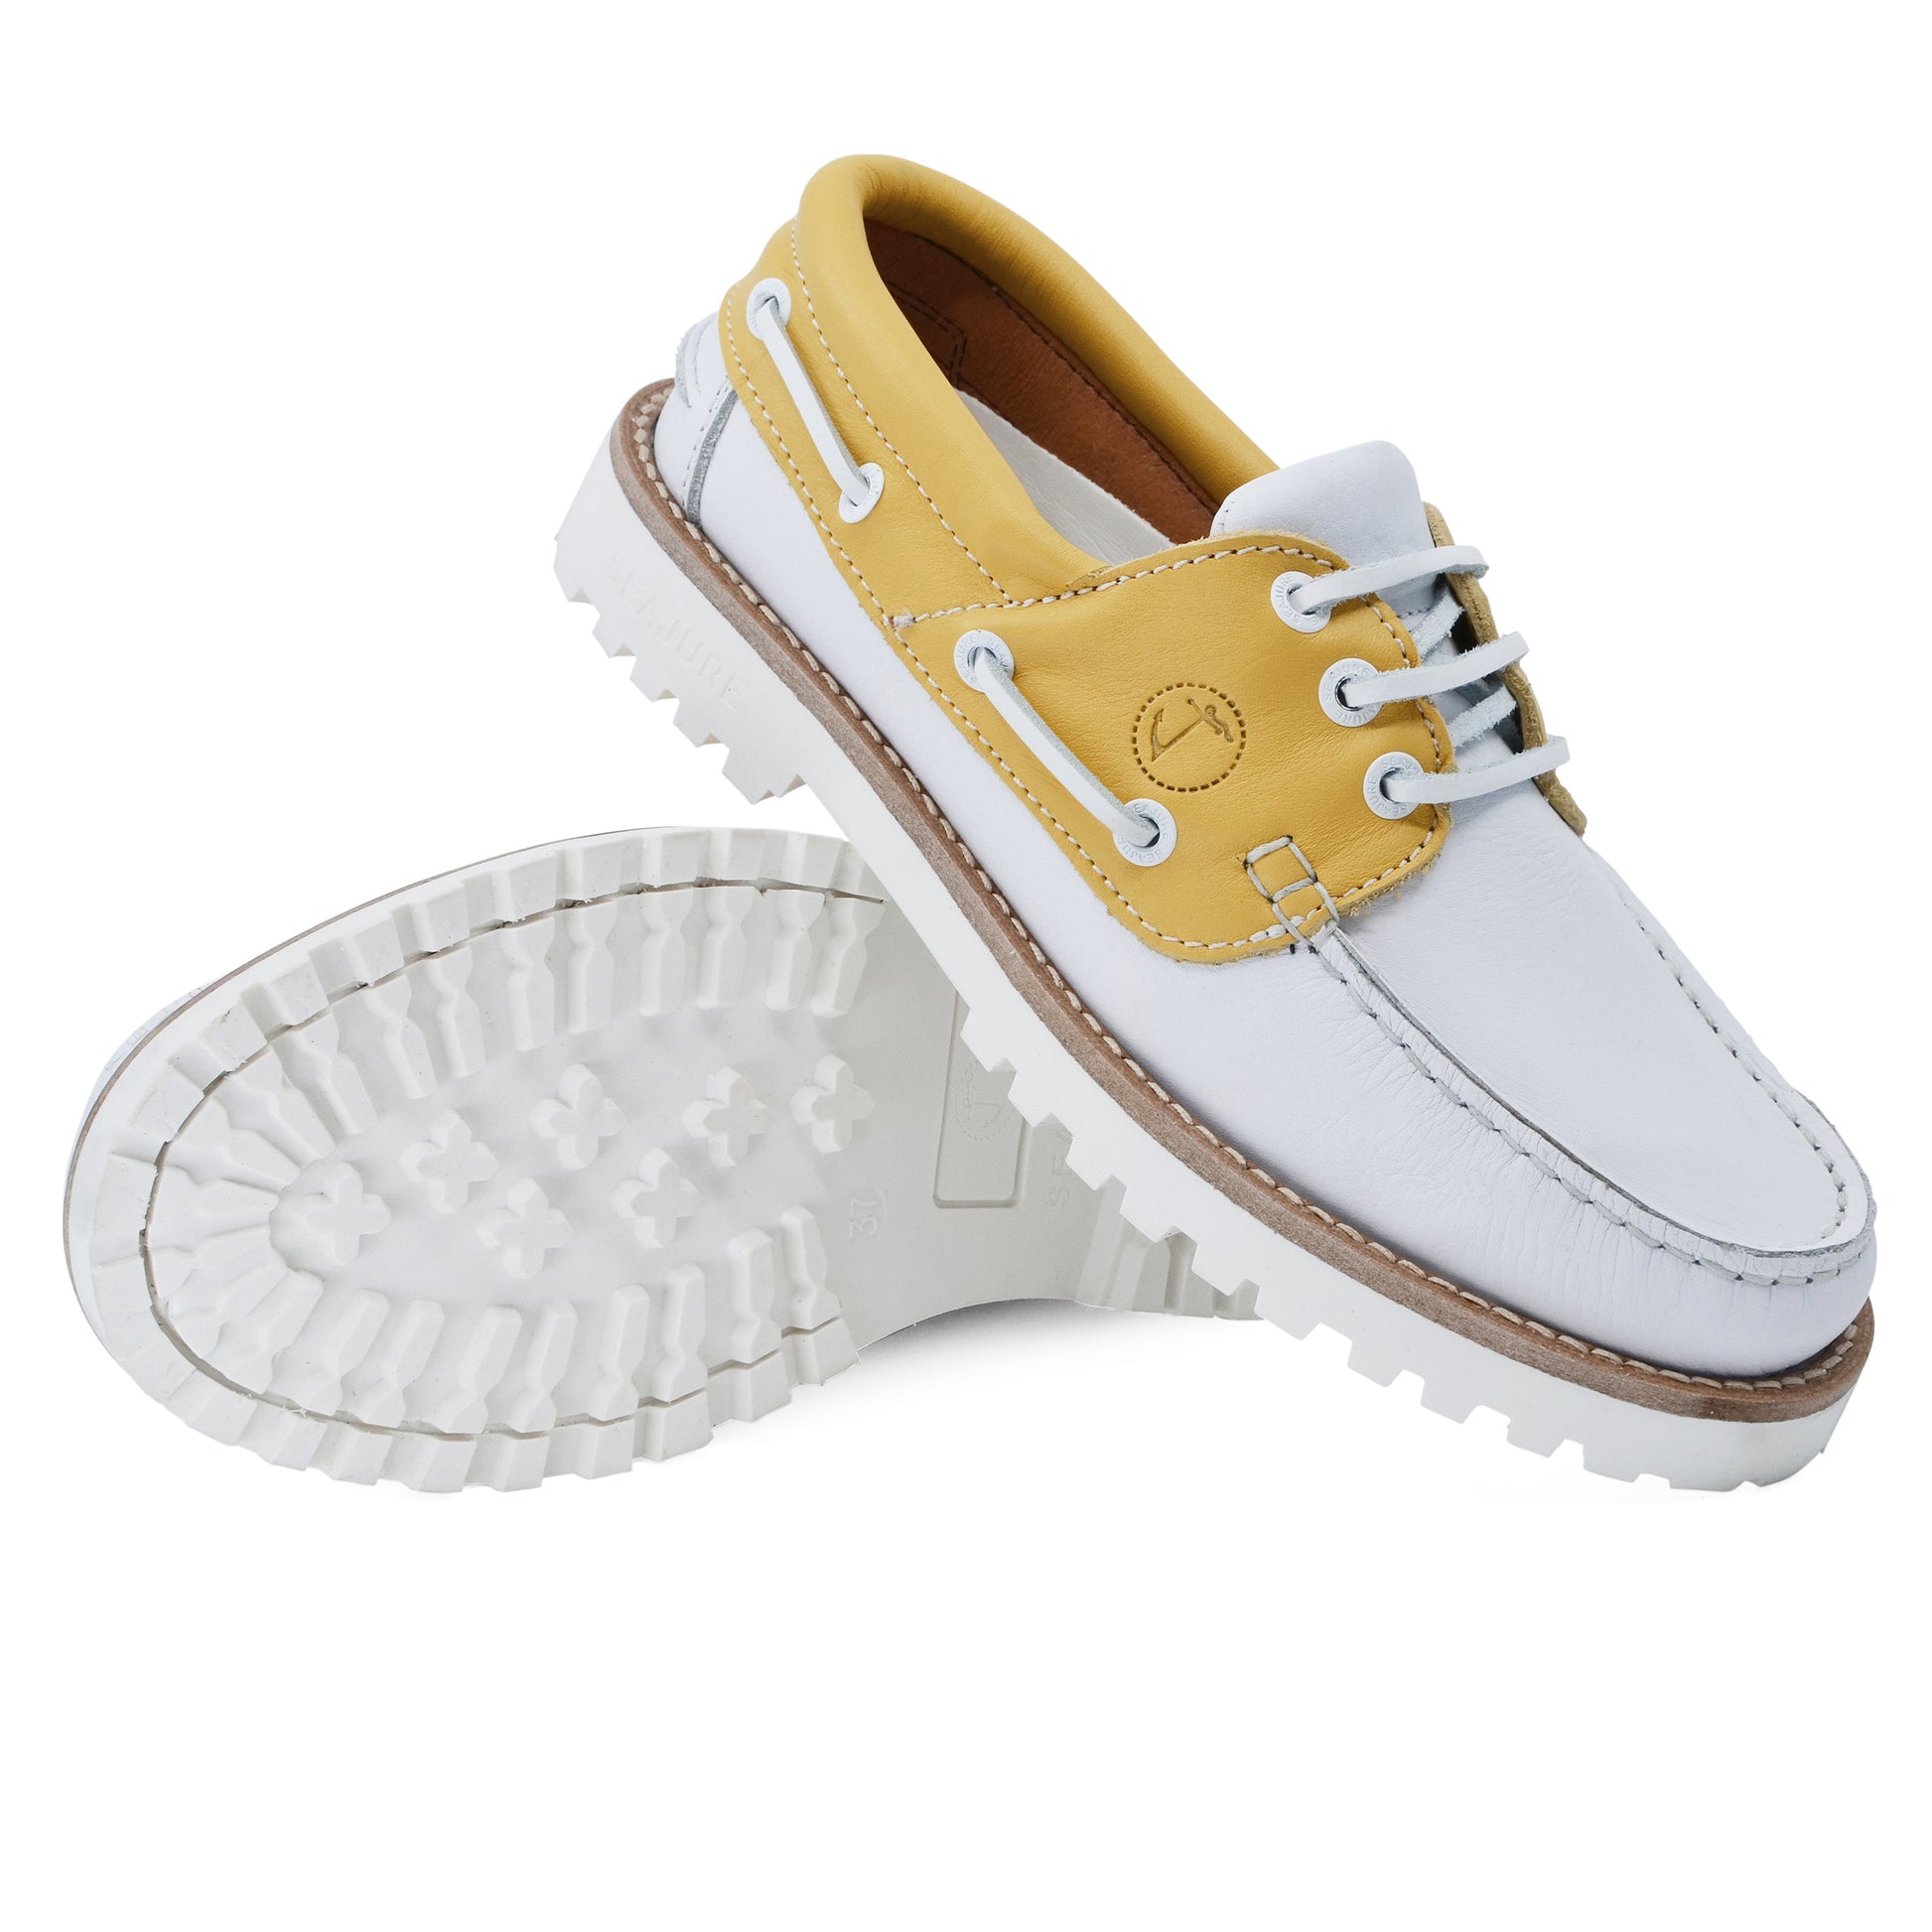 Women Boat Shoe White and Yellow Leather Quirimbas Seajure